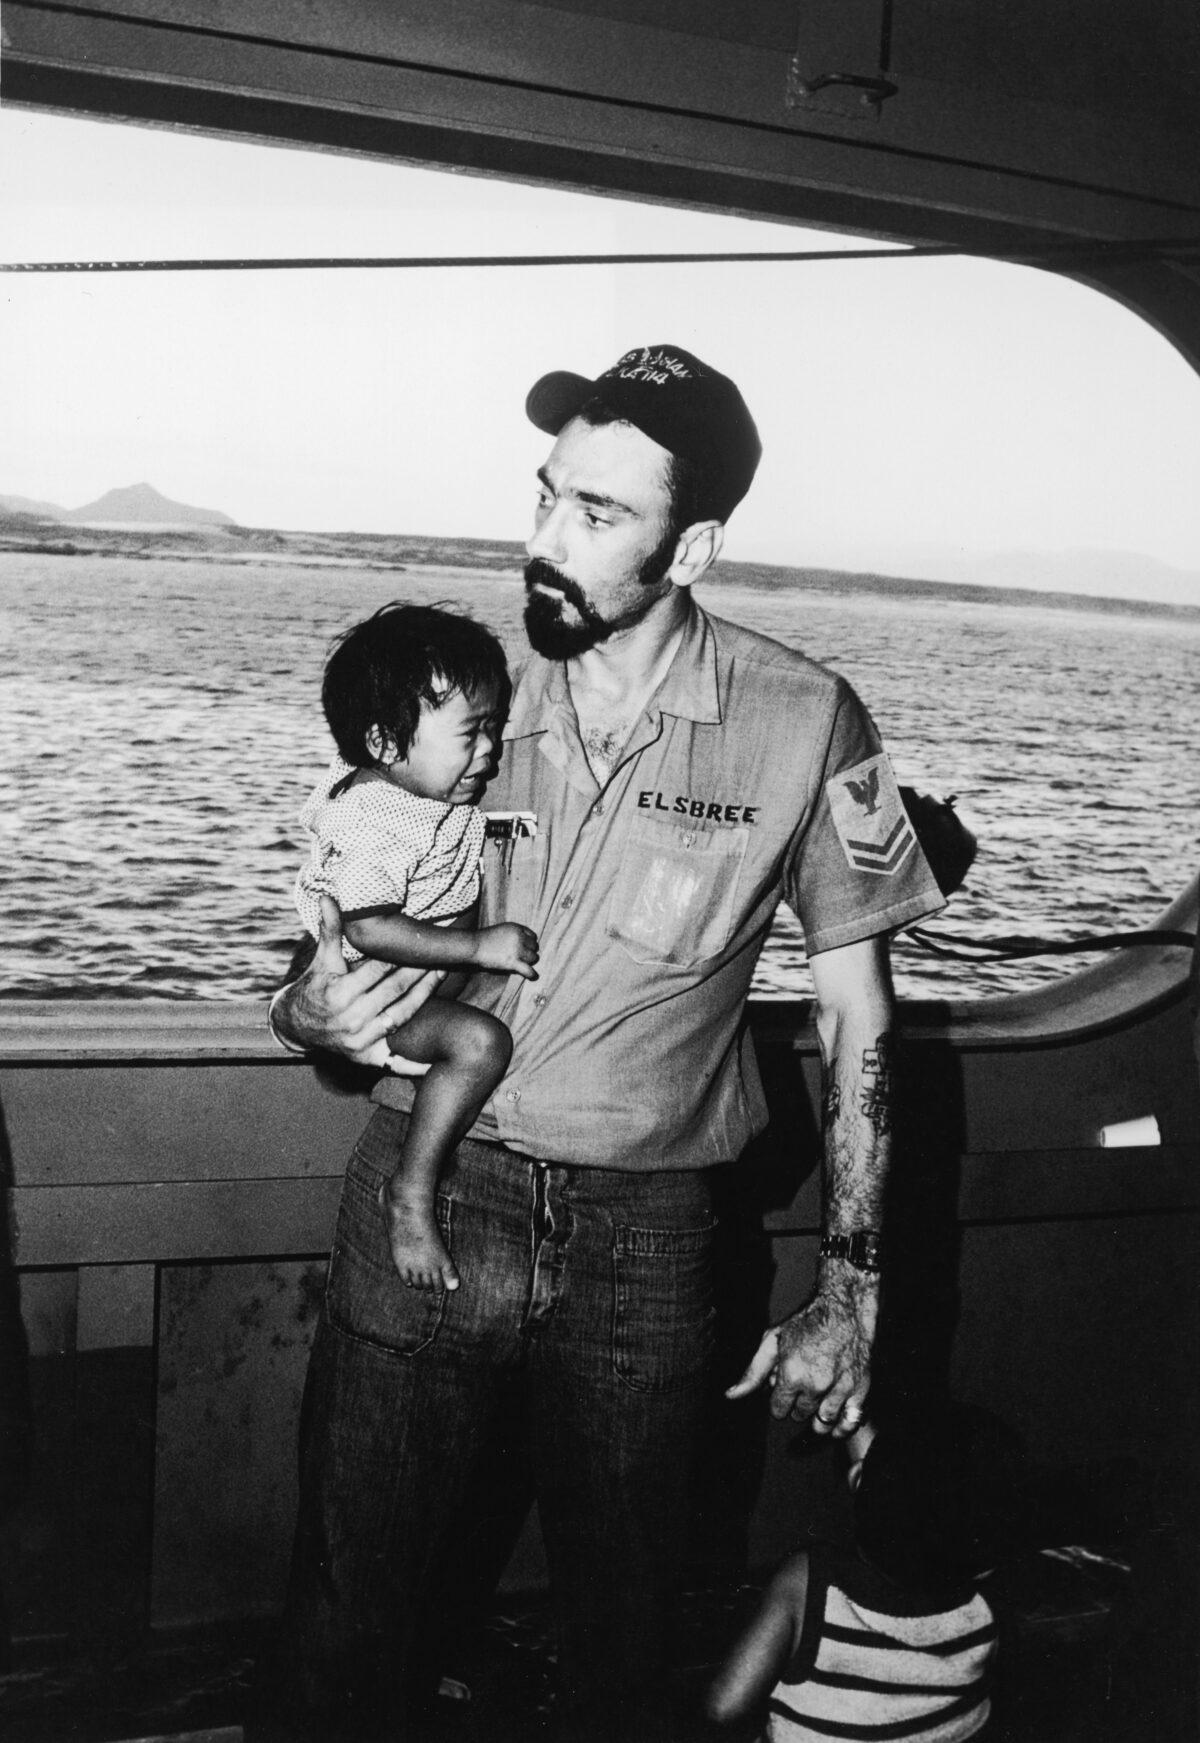 Boatswain's Mate 2nd Class Truman Elsbree of Bremerton, New York, cares for two small Vietnamese children who have been separated from their mother during the evacuation to the amphibious cargo ship USS Durham in the South China Sea, Vietnam, April 1975. The Durham evacuated more than 3,000 refugees from the Phan Rang area of Vietnam during operations on April 3 and 4, 1975. (Pictorial Parade/Getty Images)